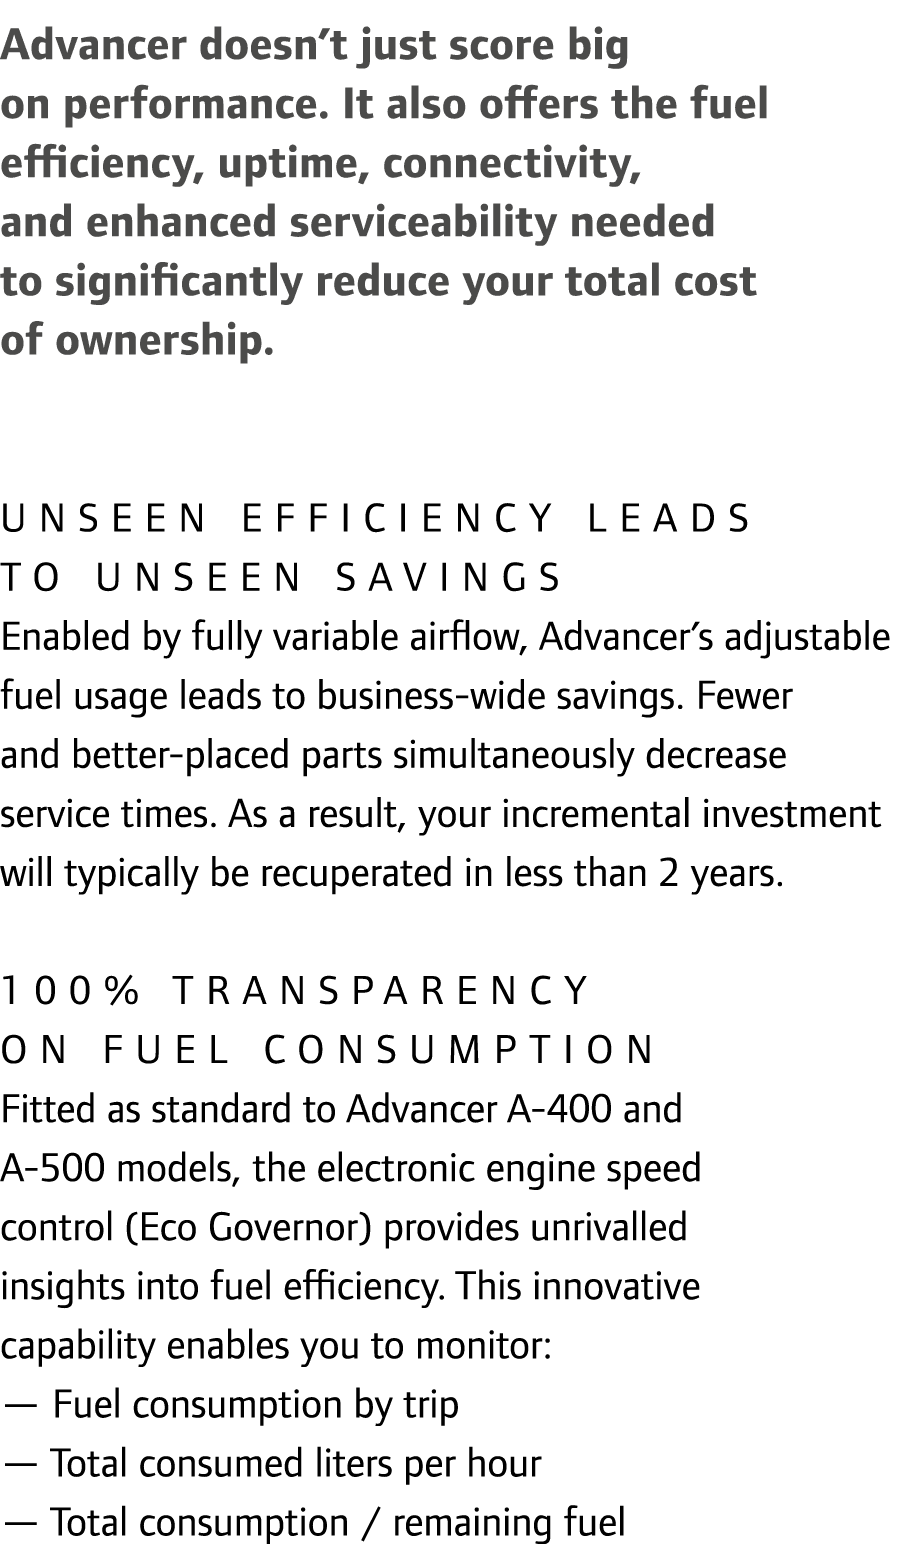 Advancer doesn’t just score big on performance. It also offers the fuel efficiency, uptime, connectivity, and enhance...